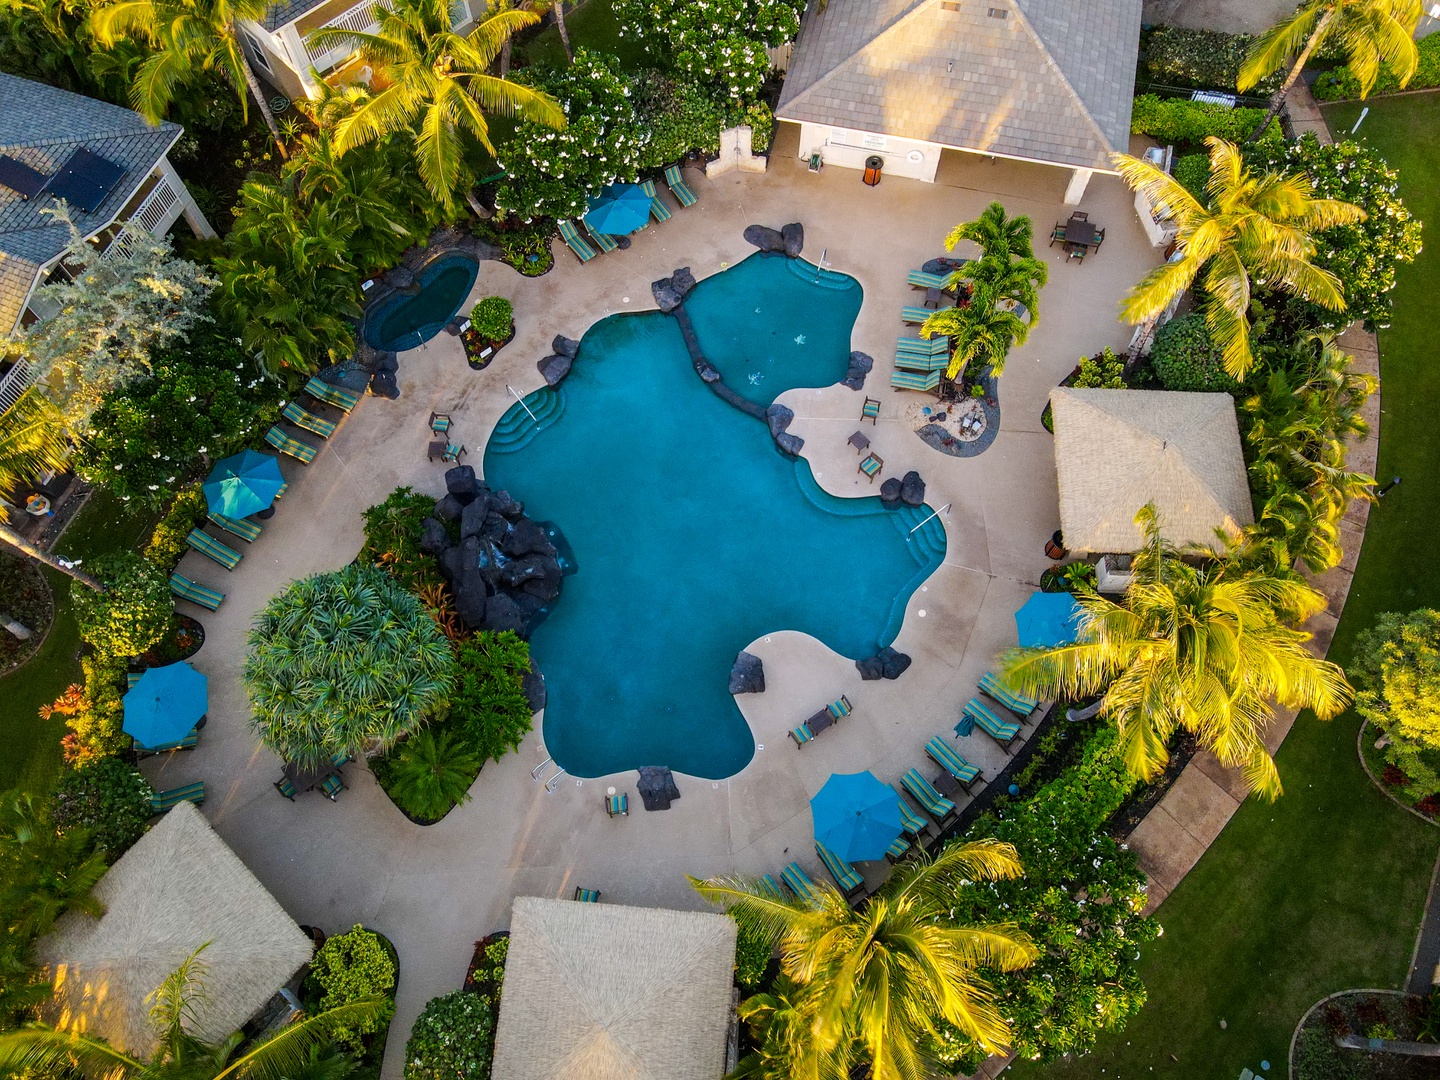 Kapolei Vacation Rentals, Ko Olina Kai 1033C - An aerial view of the community pool, cabana and loungers.